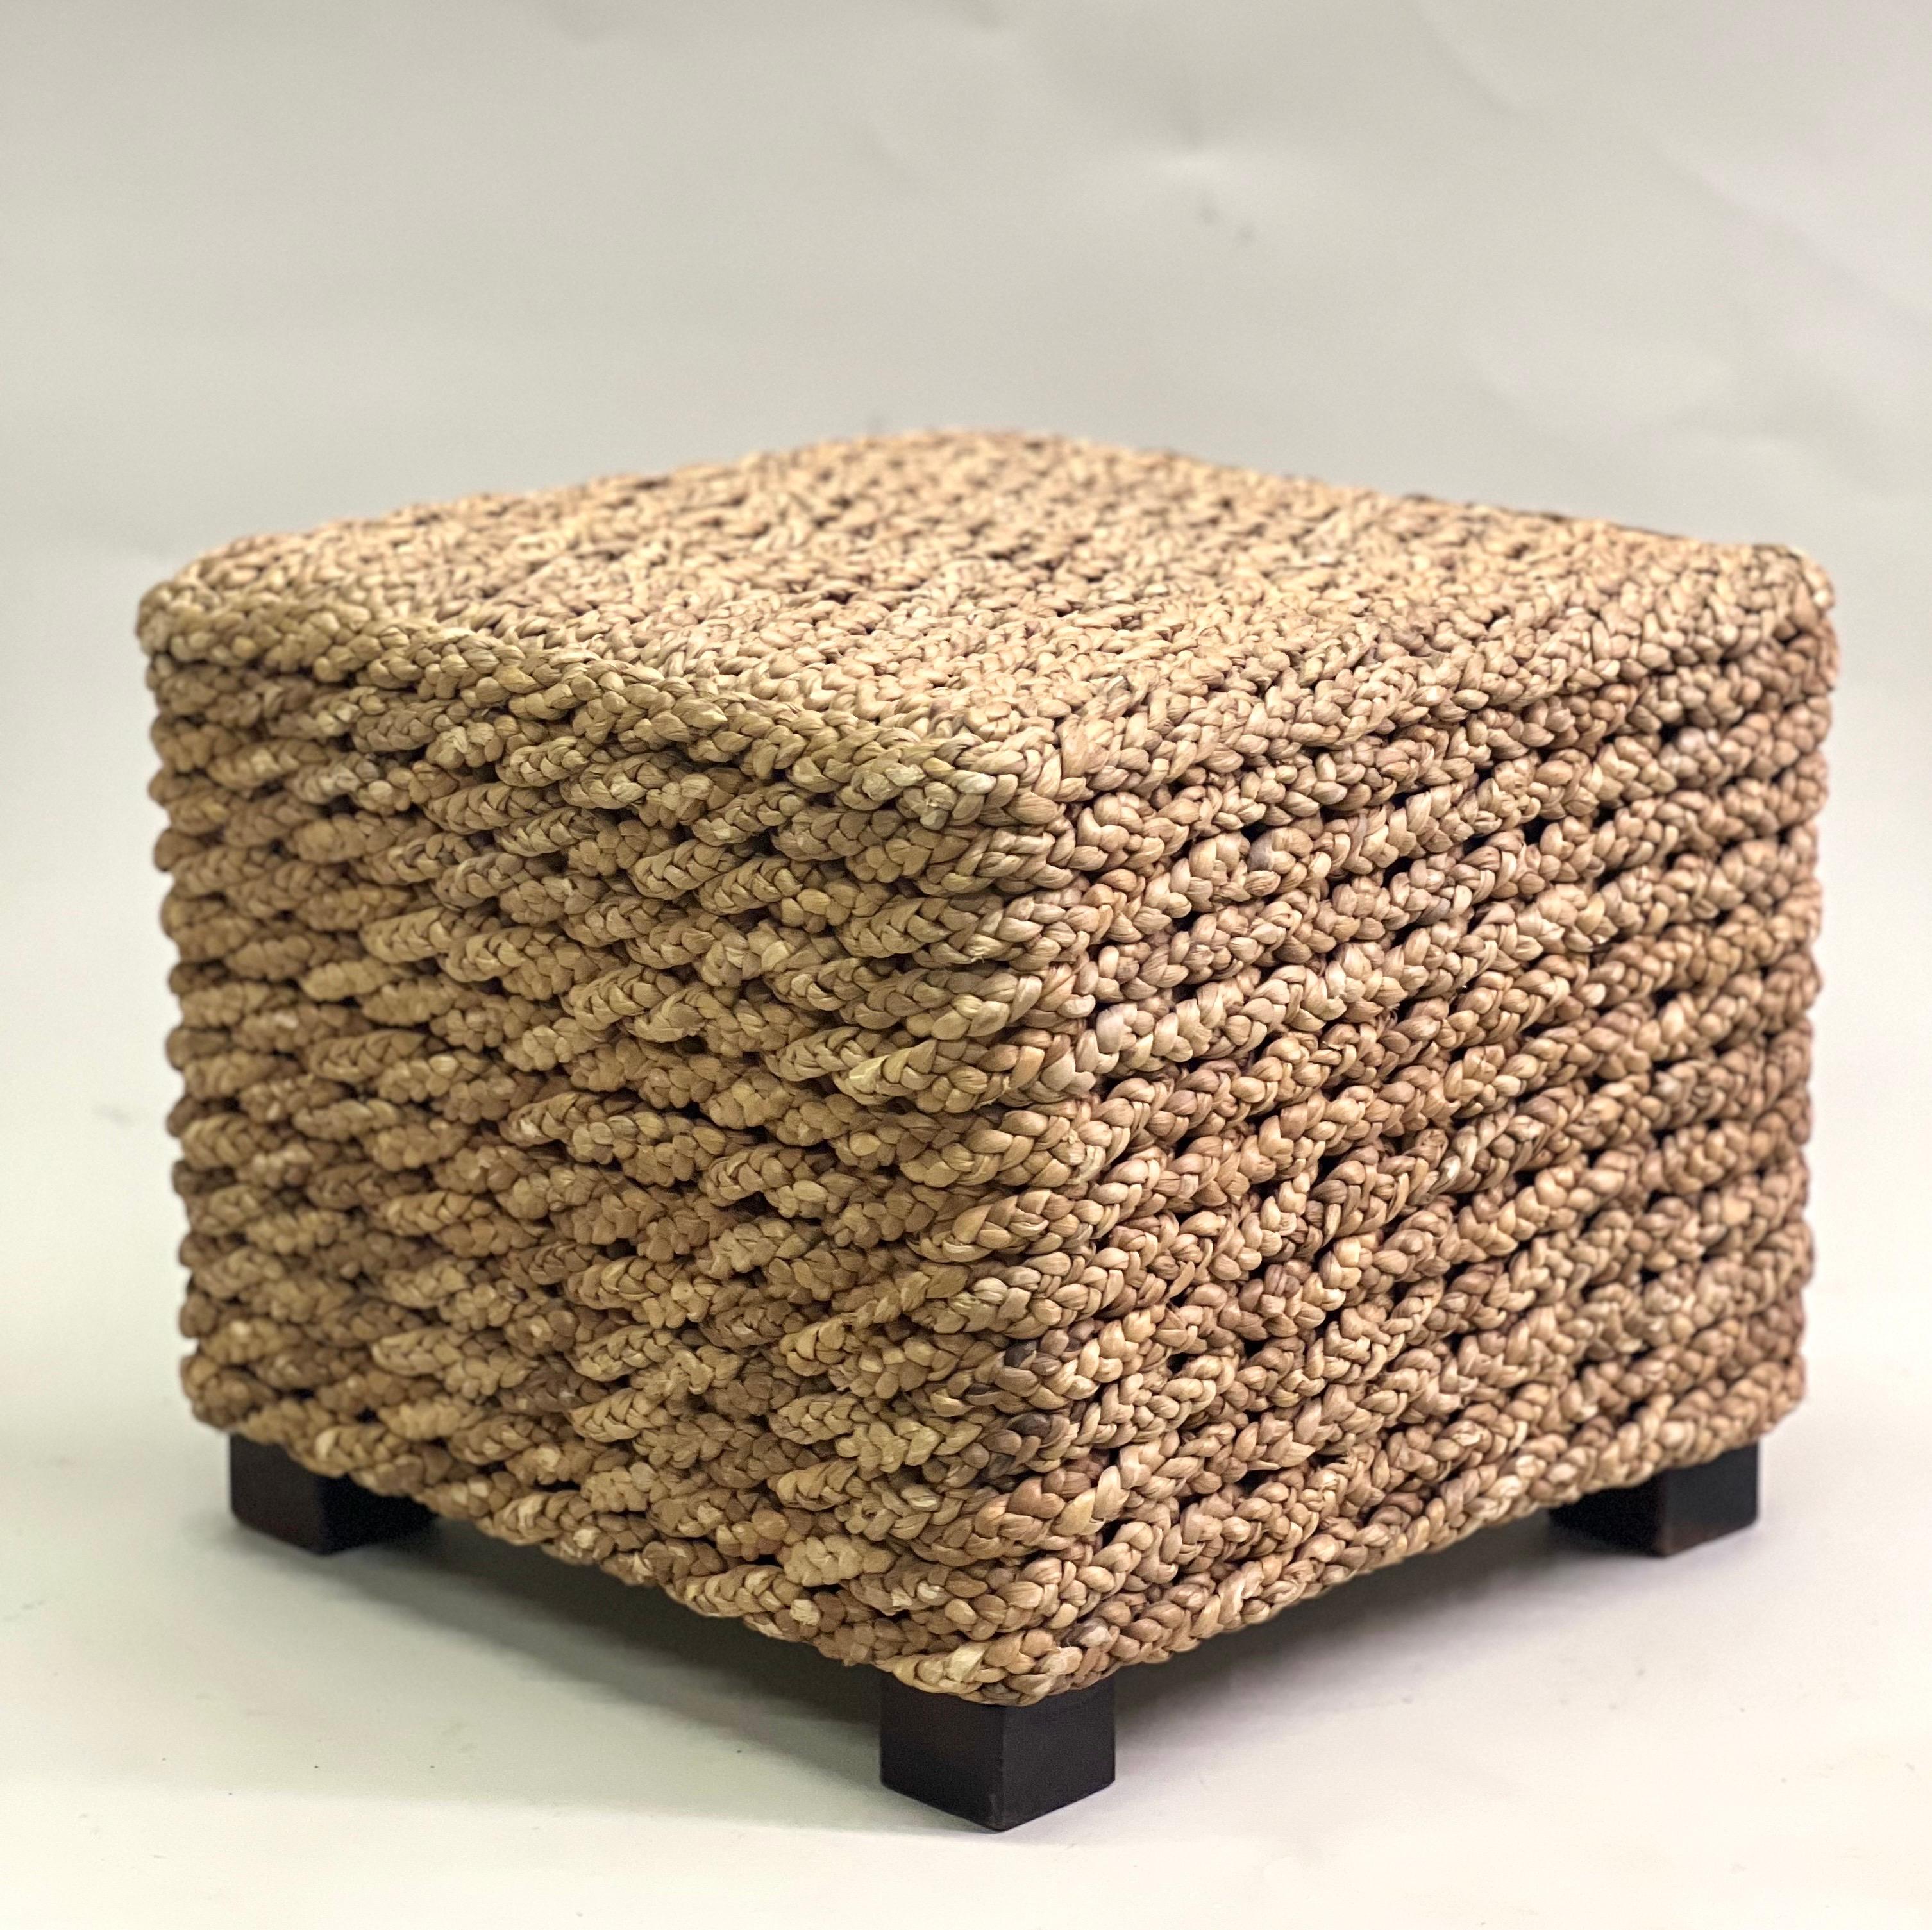 Pair of French Mid-Century Rope Stools / Benches by Adrien Audoux & Frida Minet For Sale 2